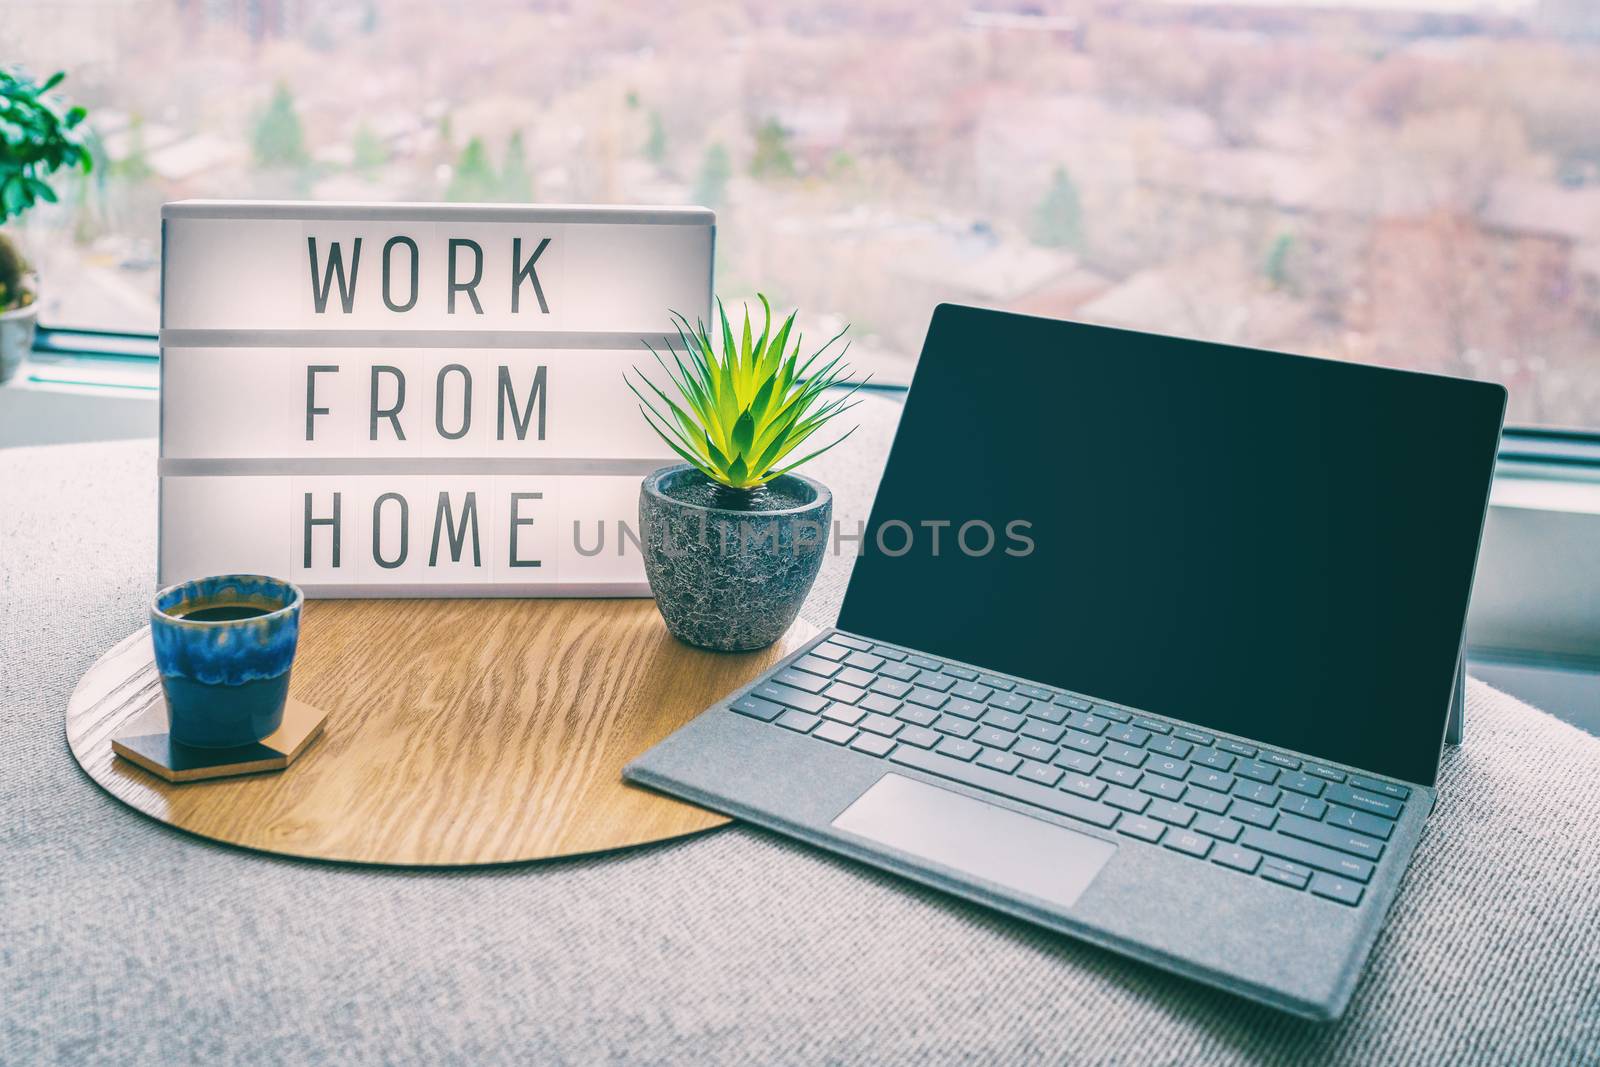 Working from home remote work inspirational social media lightbox message board next to laptop and coffee cup for COVID-19 quarantine closure of all businesses by Maridav